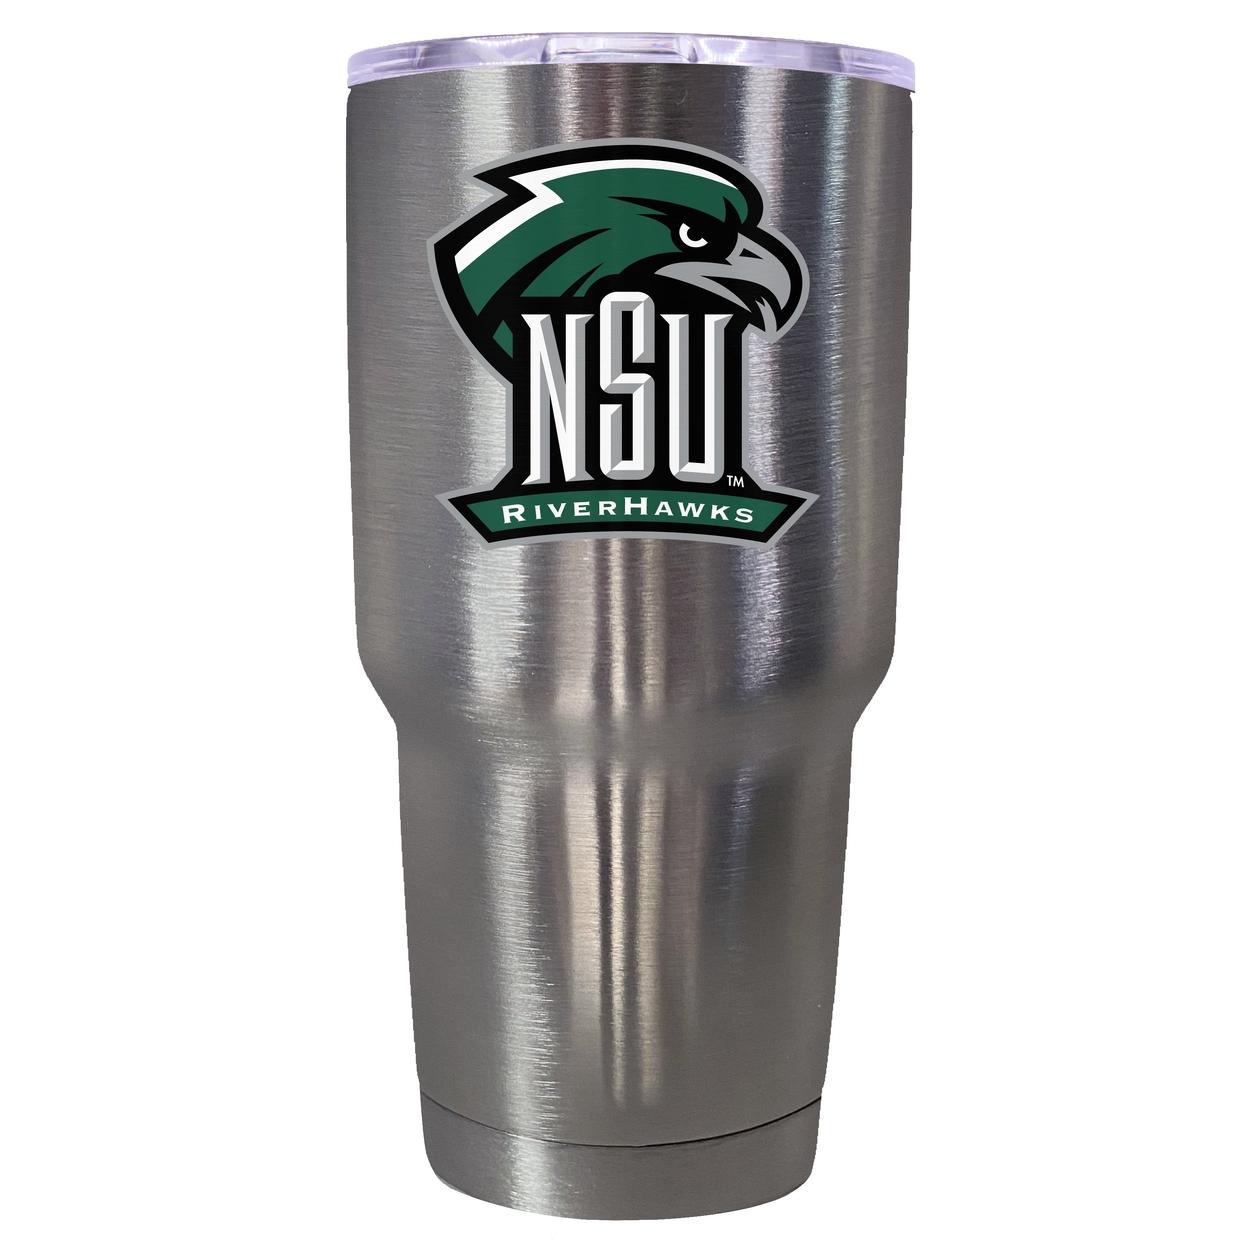 Northeastern State University Riverhawks 24 Oz Insulated Stainless Steel Tumbler